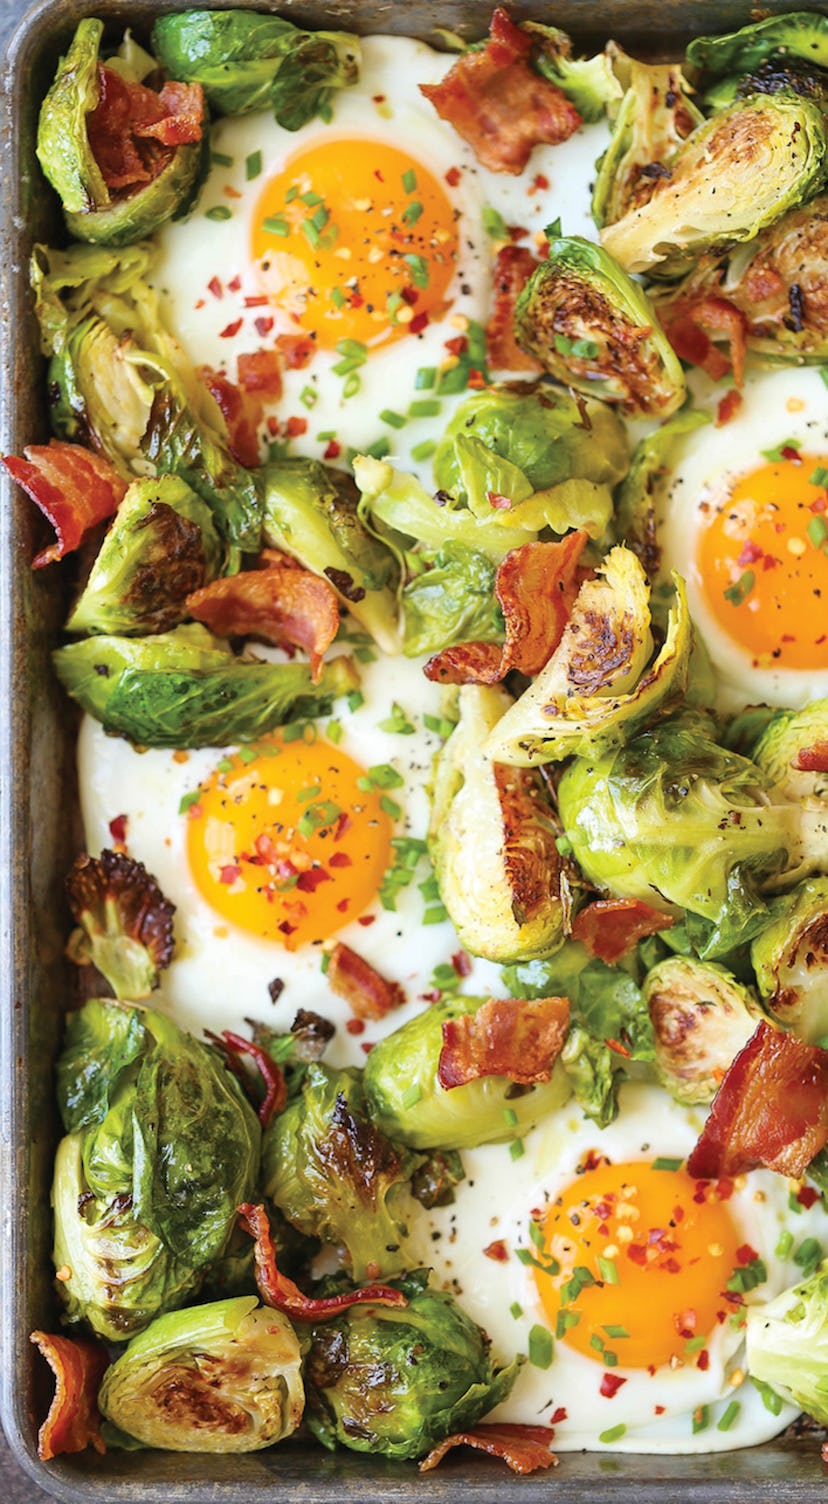 image of gluten free sheet pan breakfast, eggs, bacon and brussel sprouts